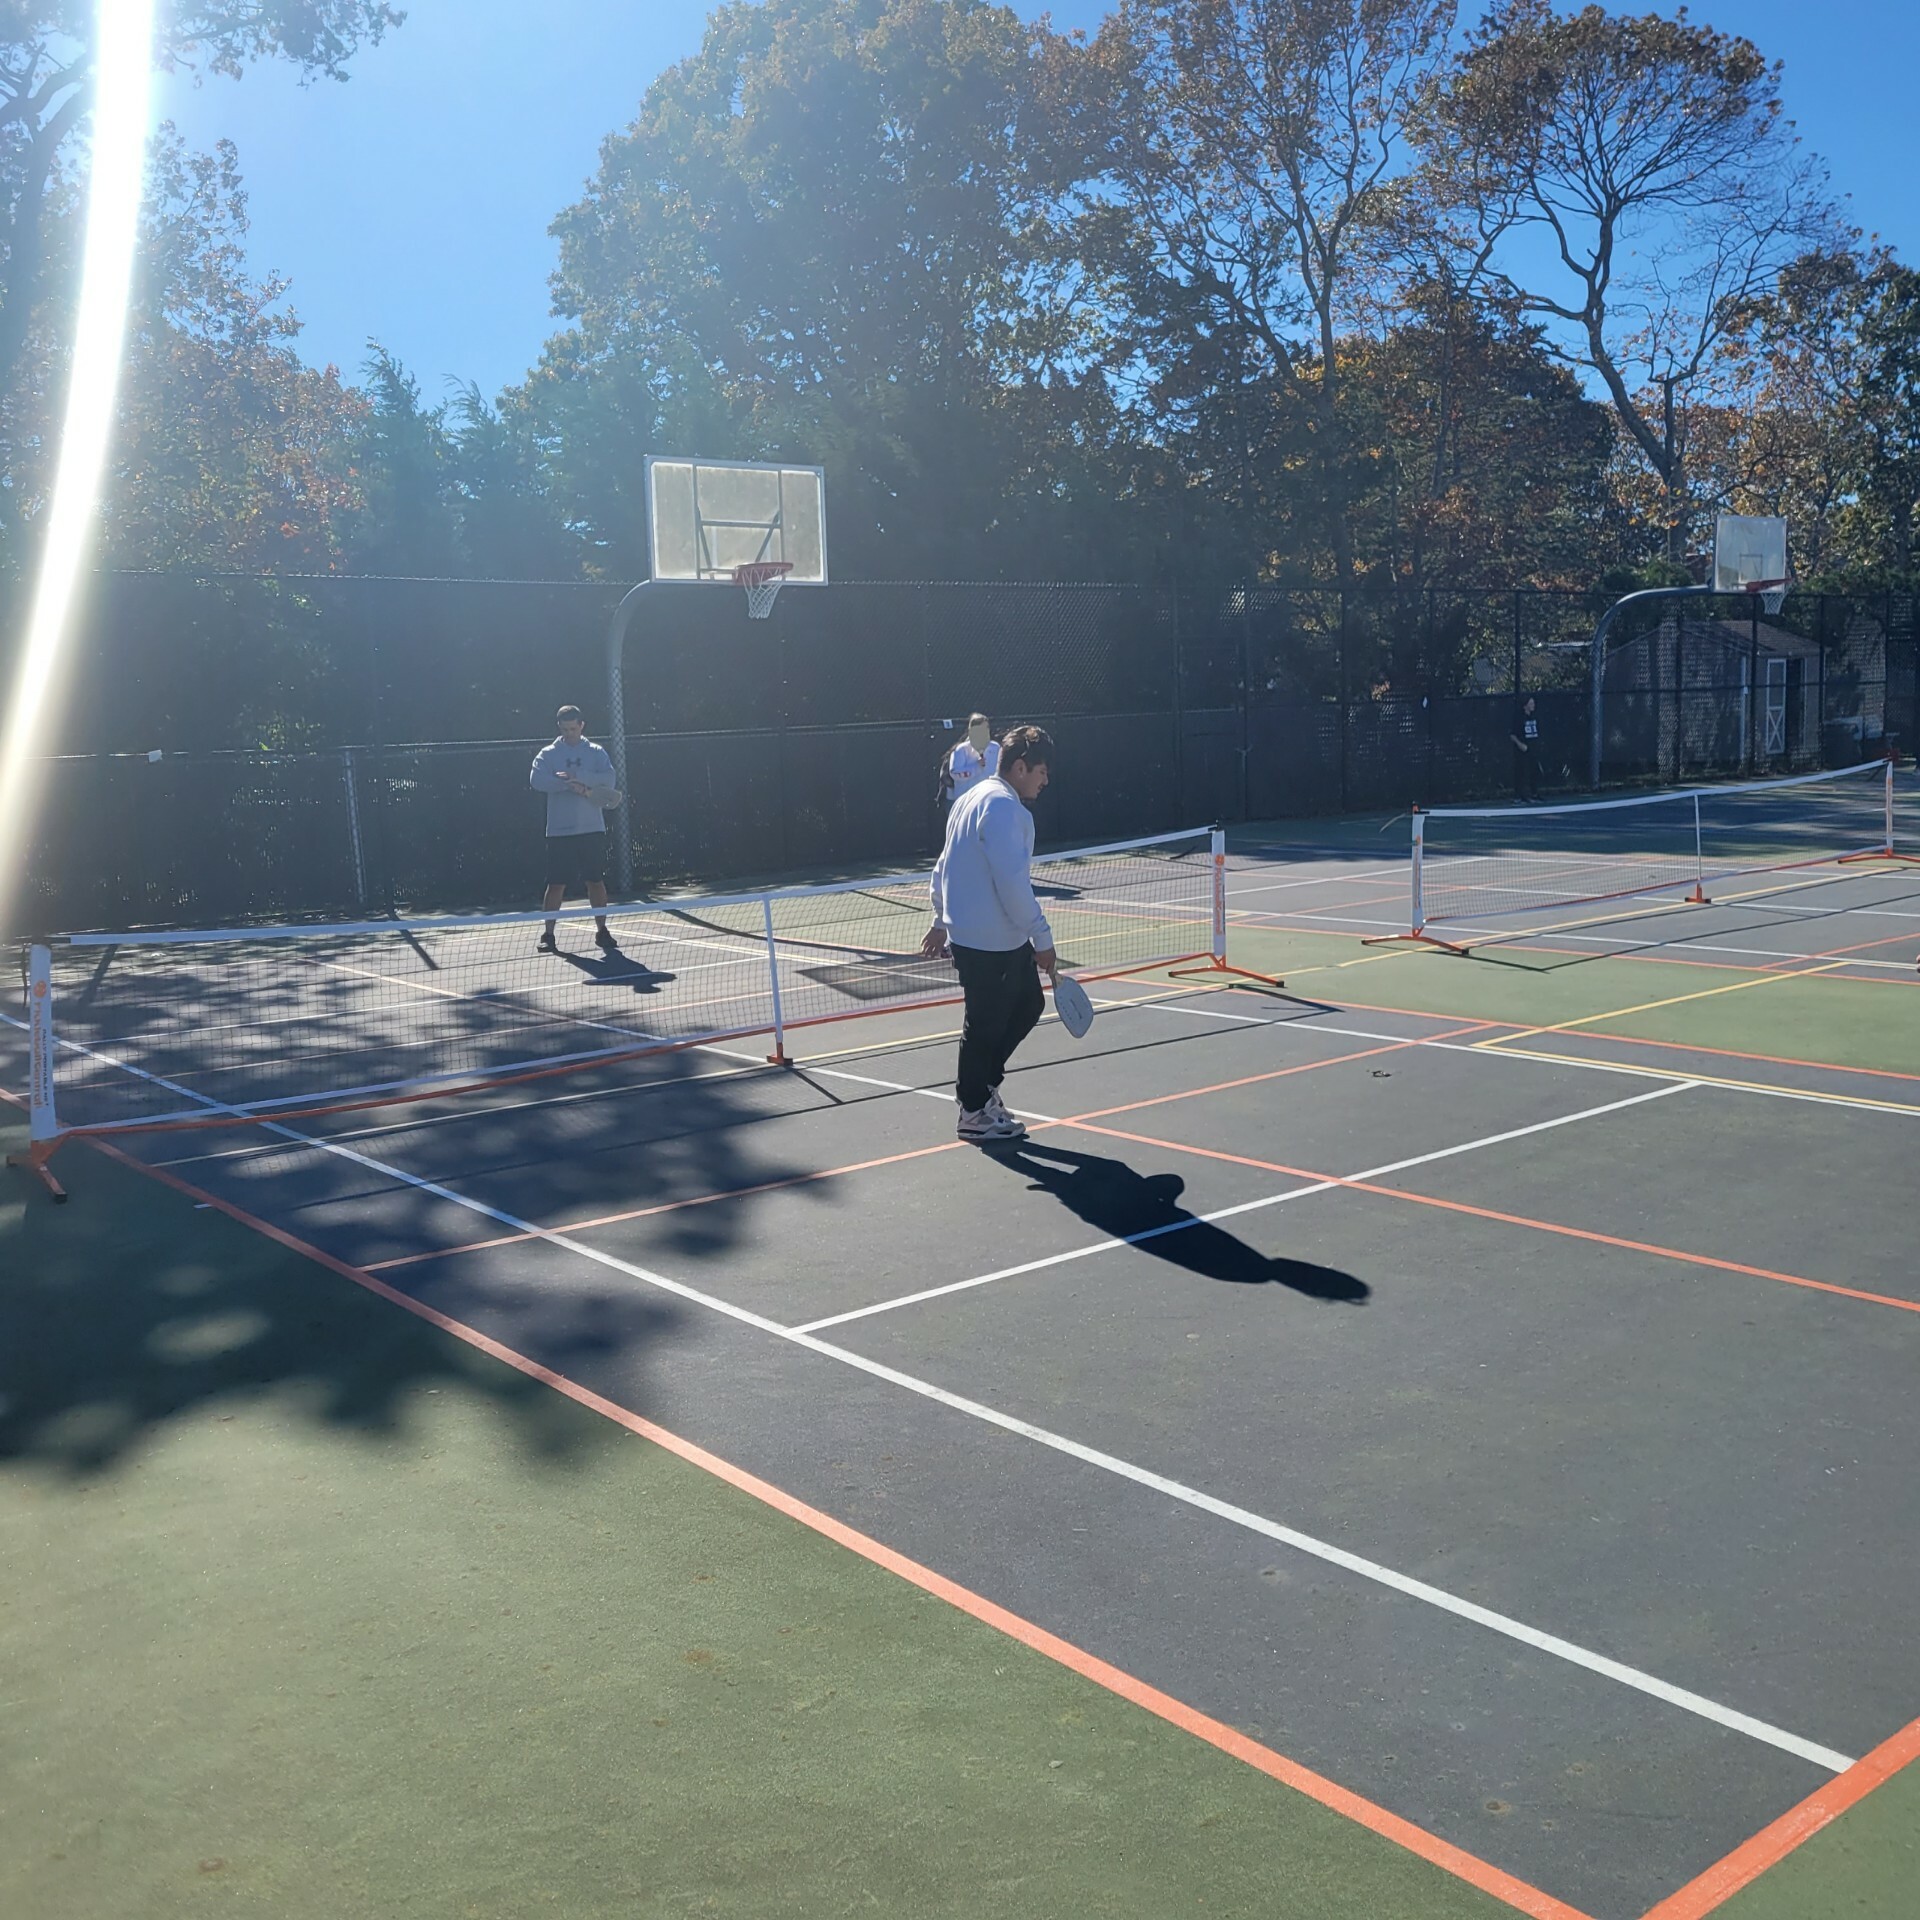 Hampton Bays schools relined what had been badminton courts previously to pickleball courts.